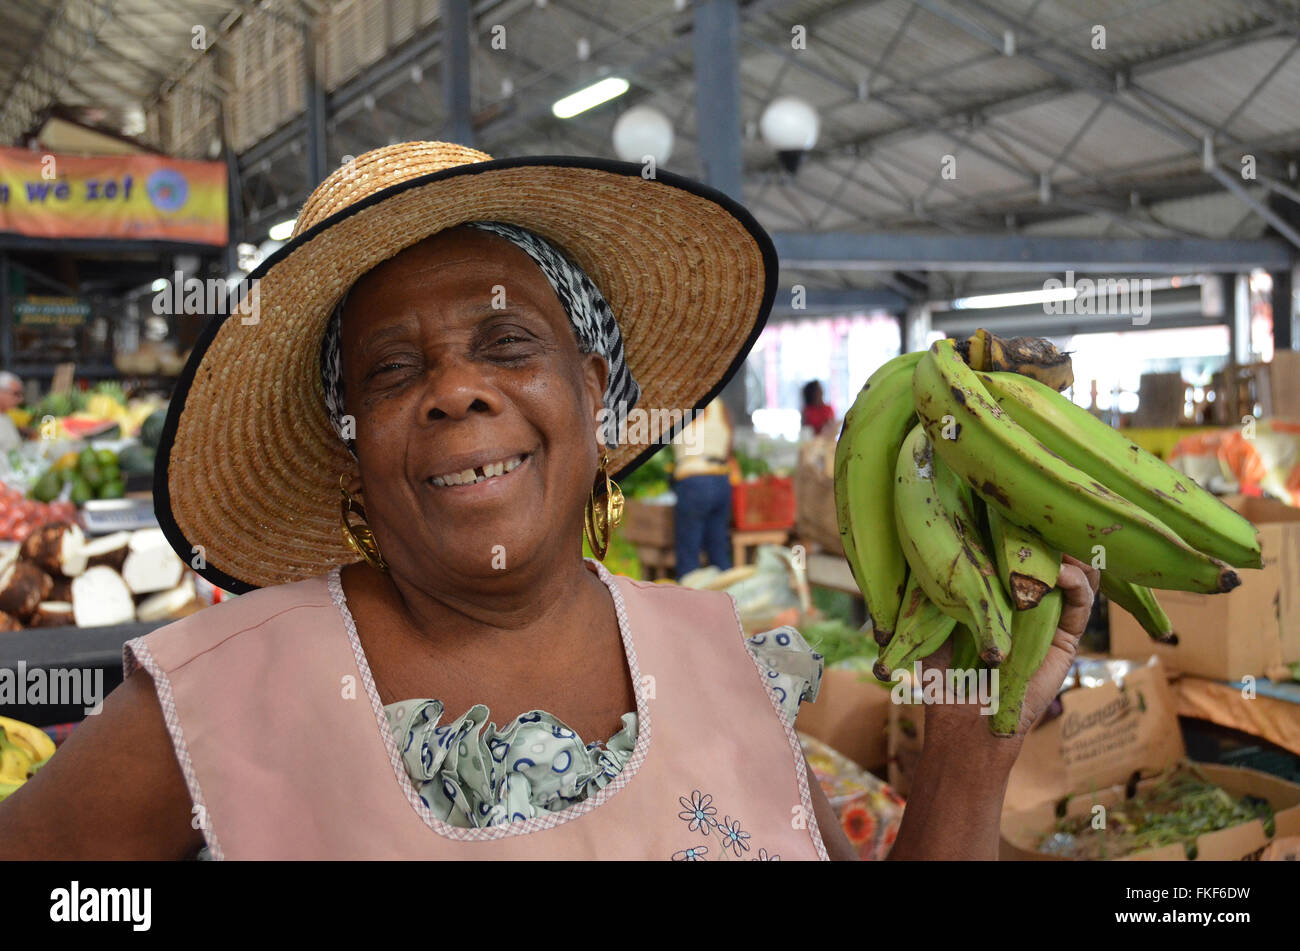 Local market trader, selling Bananas in the covered market  in Fort-de-France, Martinique. Stock Photo